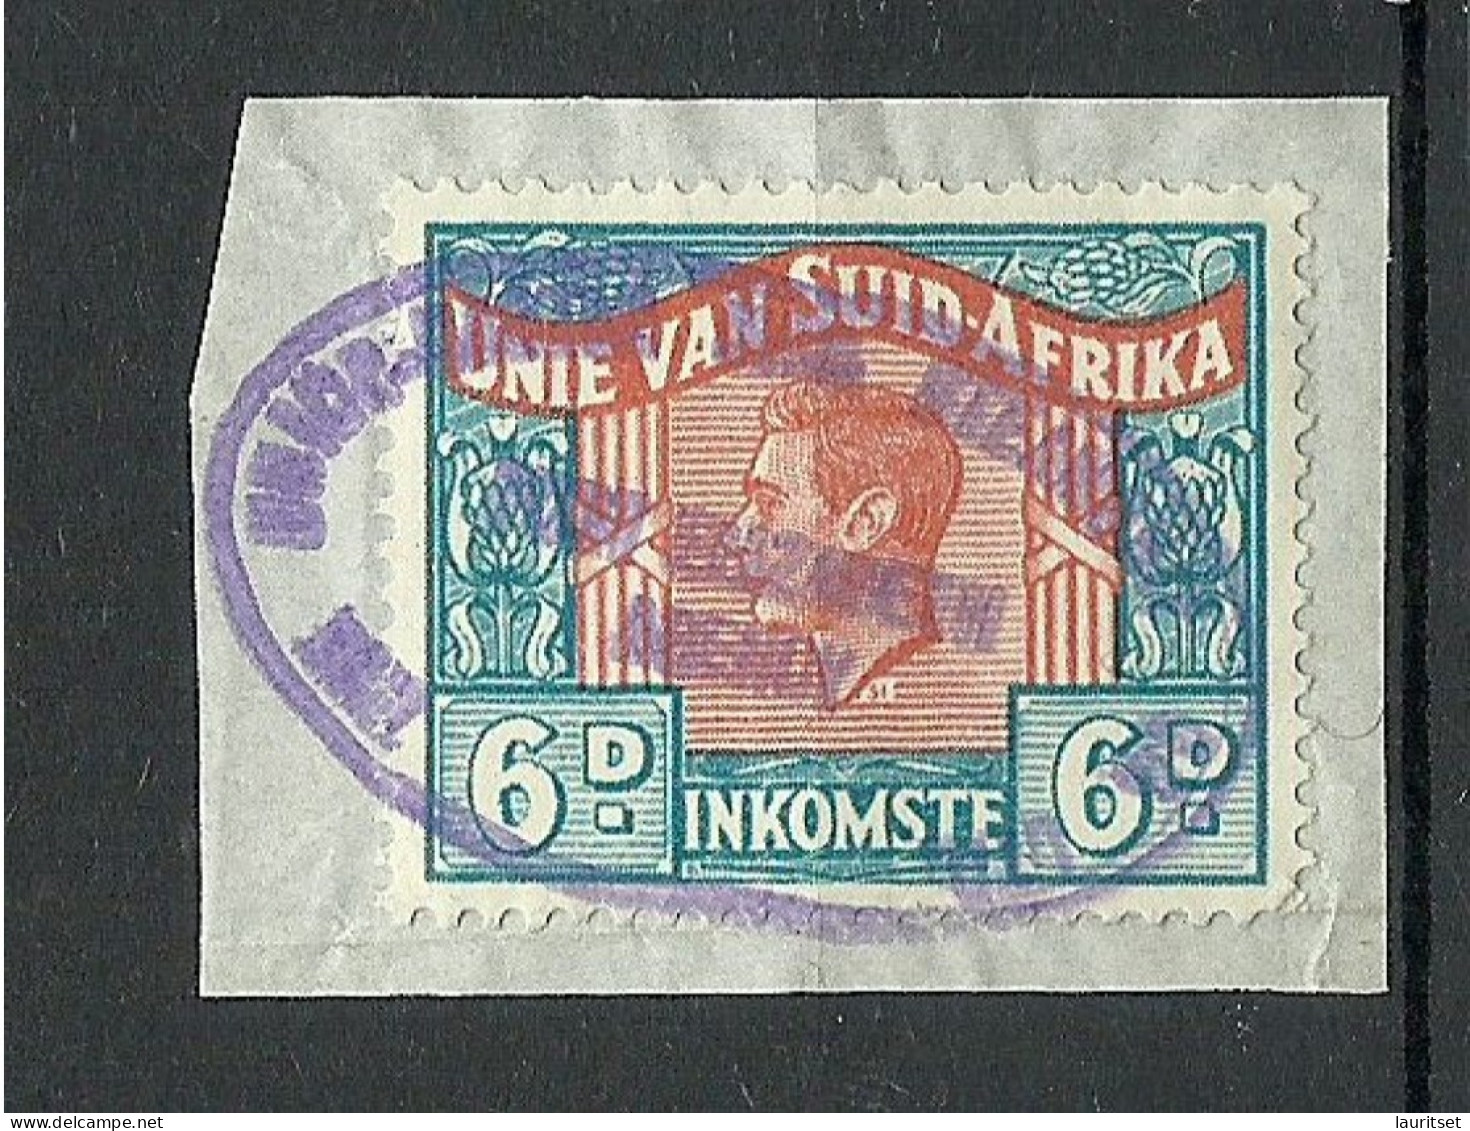 SOUTH AFRICA Inkomste Revenue Tax 6 D. O - Oficiales